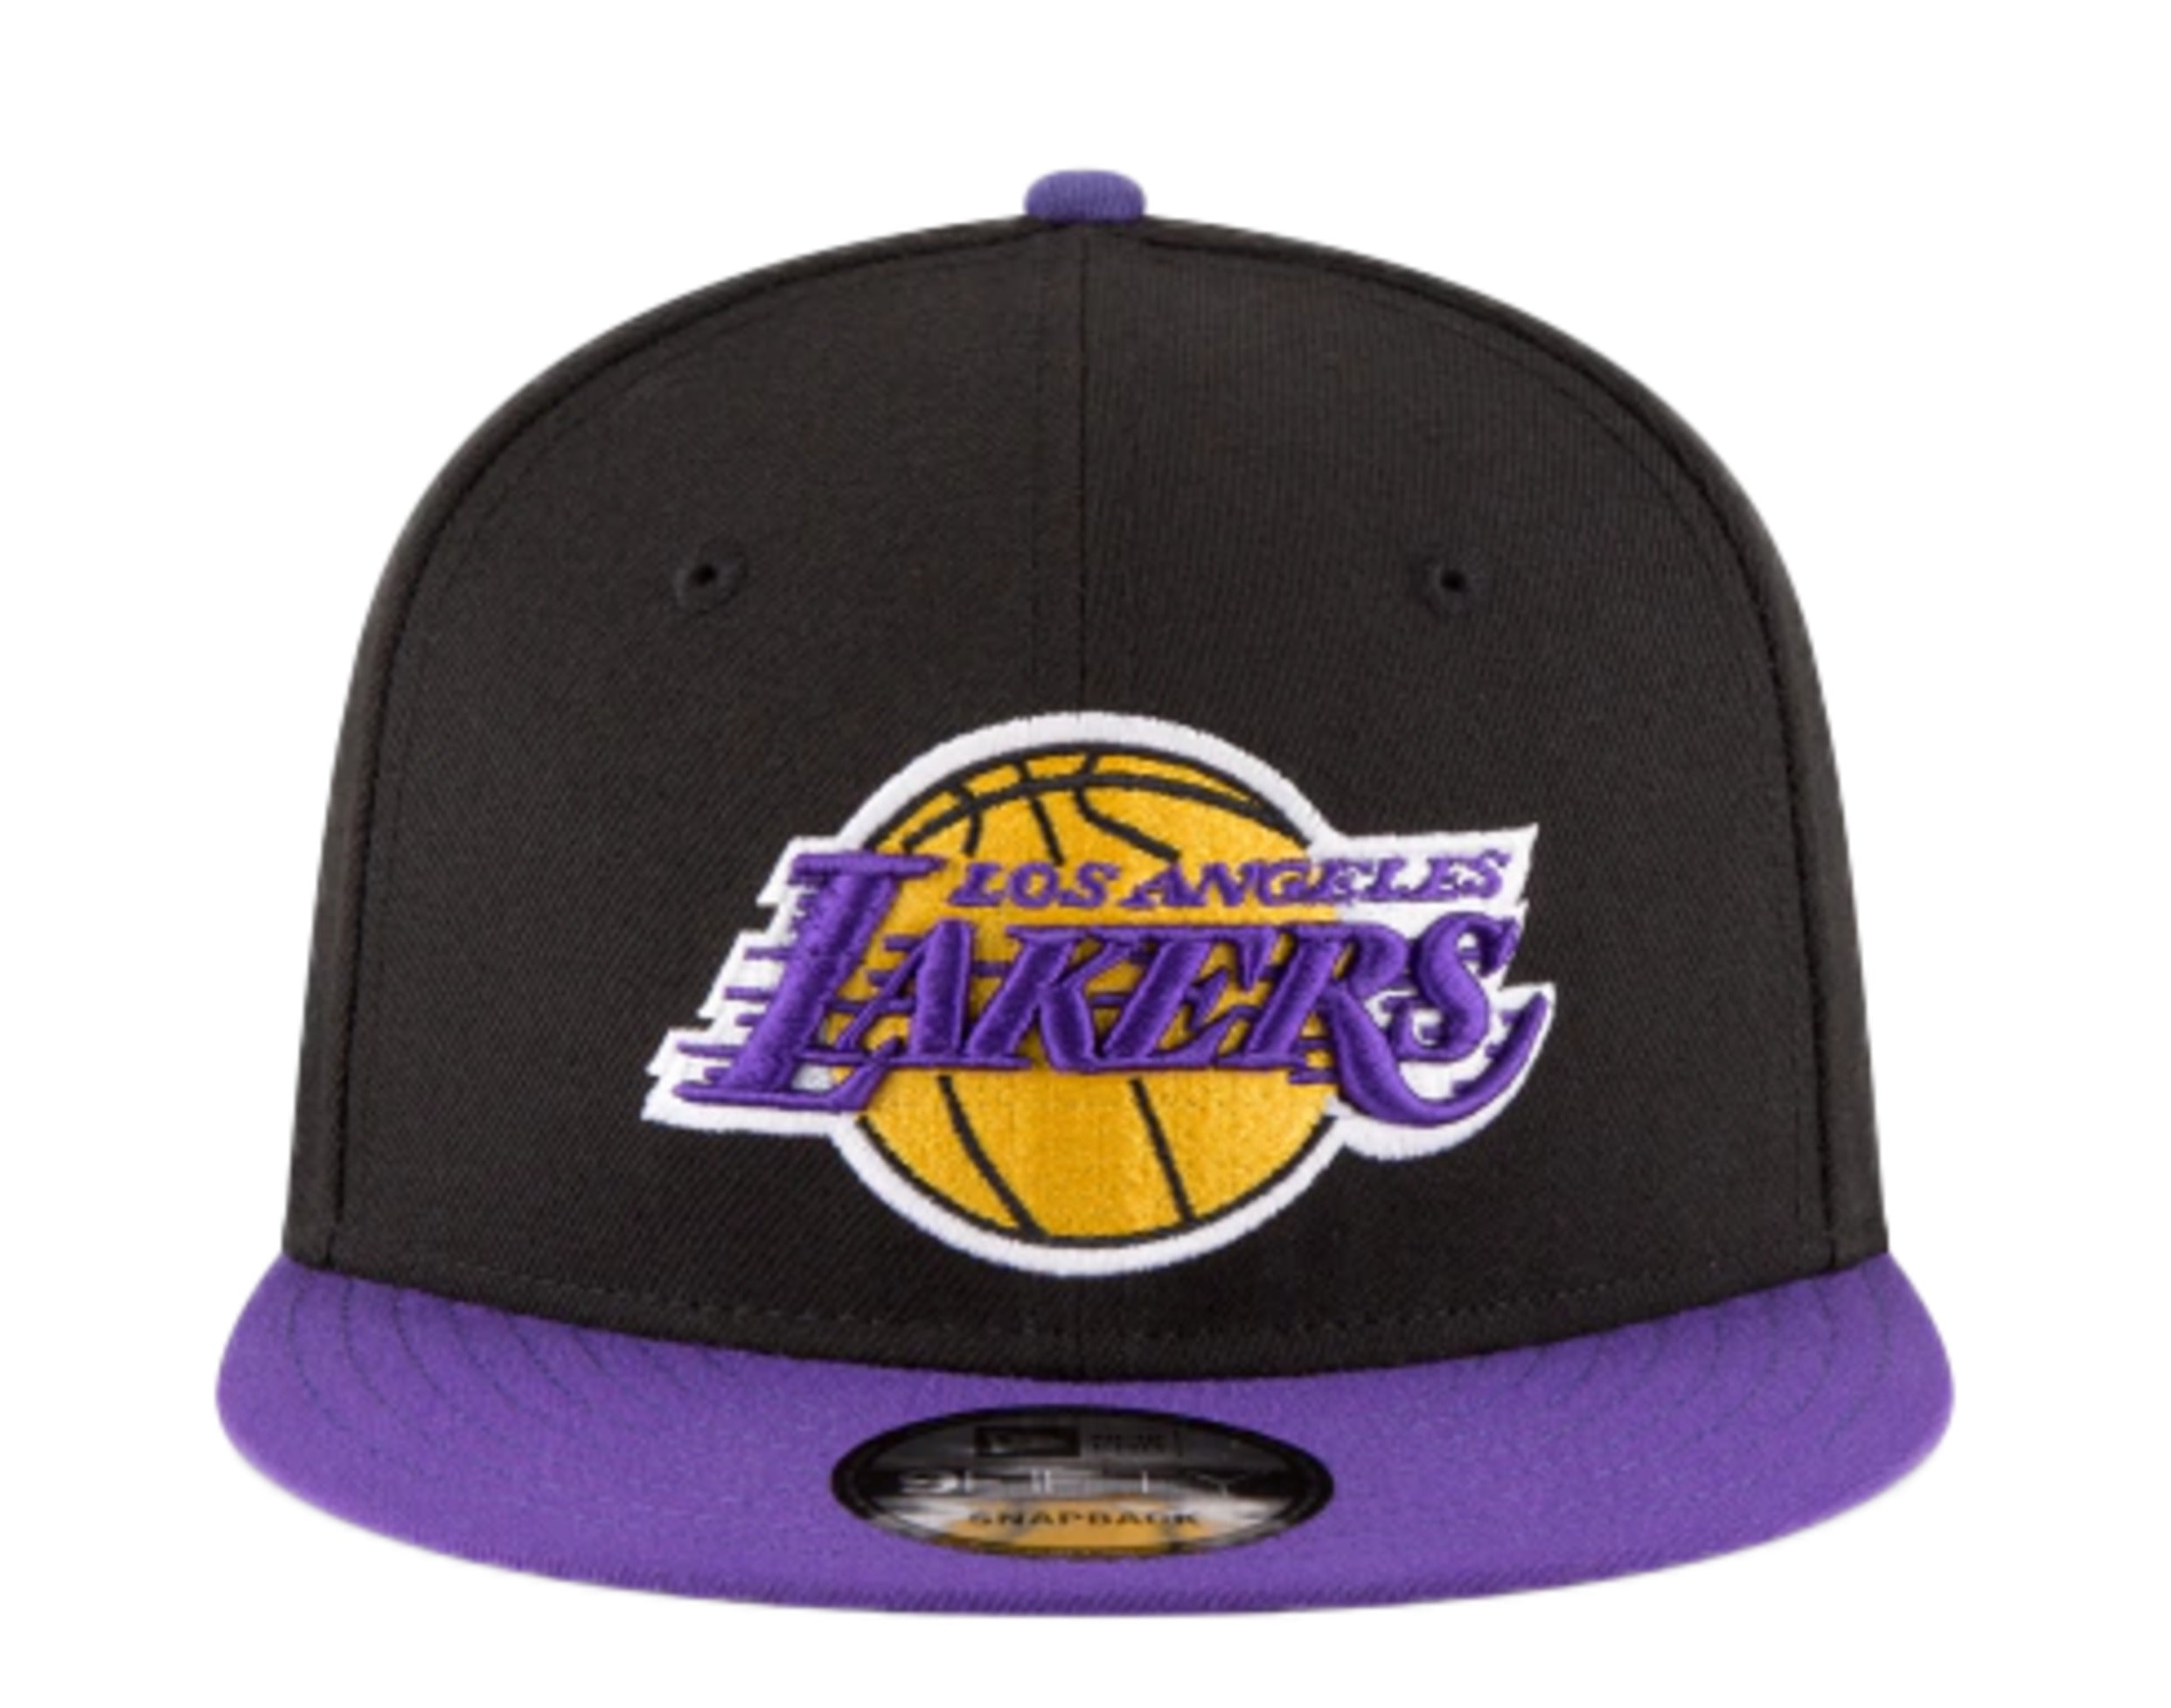 NBA Ultra G Cap Snapback Lakers flat brim New W tags Hat Adjustable  Embroidered